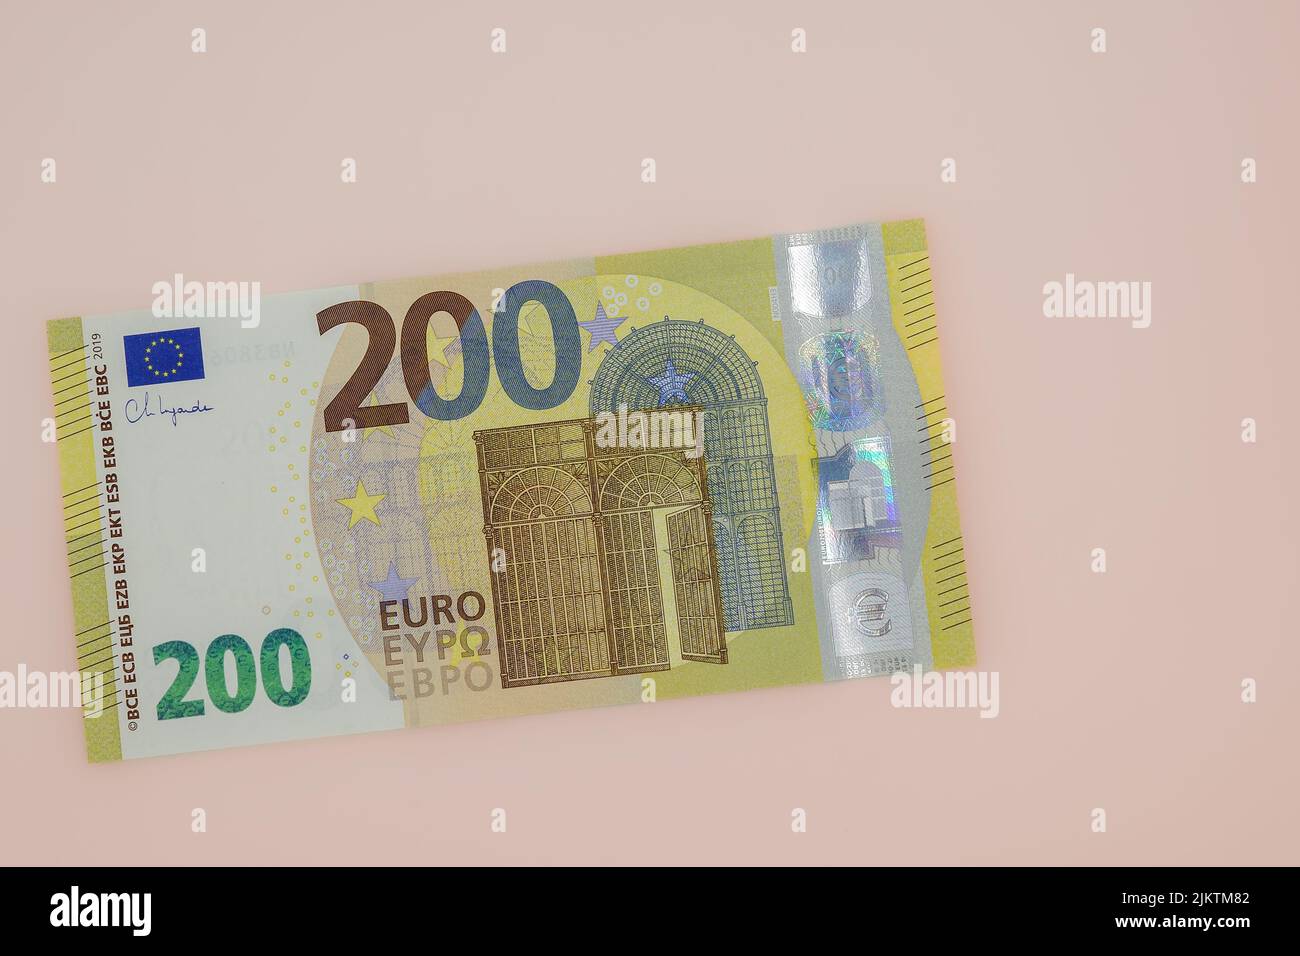 A closeup of a 200 Euro banknote on the pale peach color background. Stock Photo